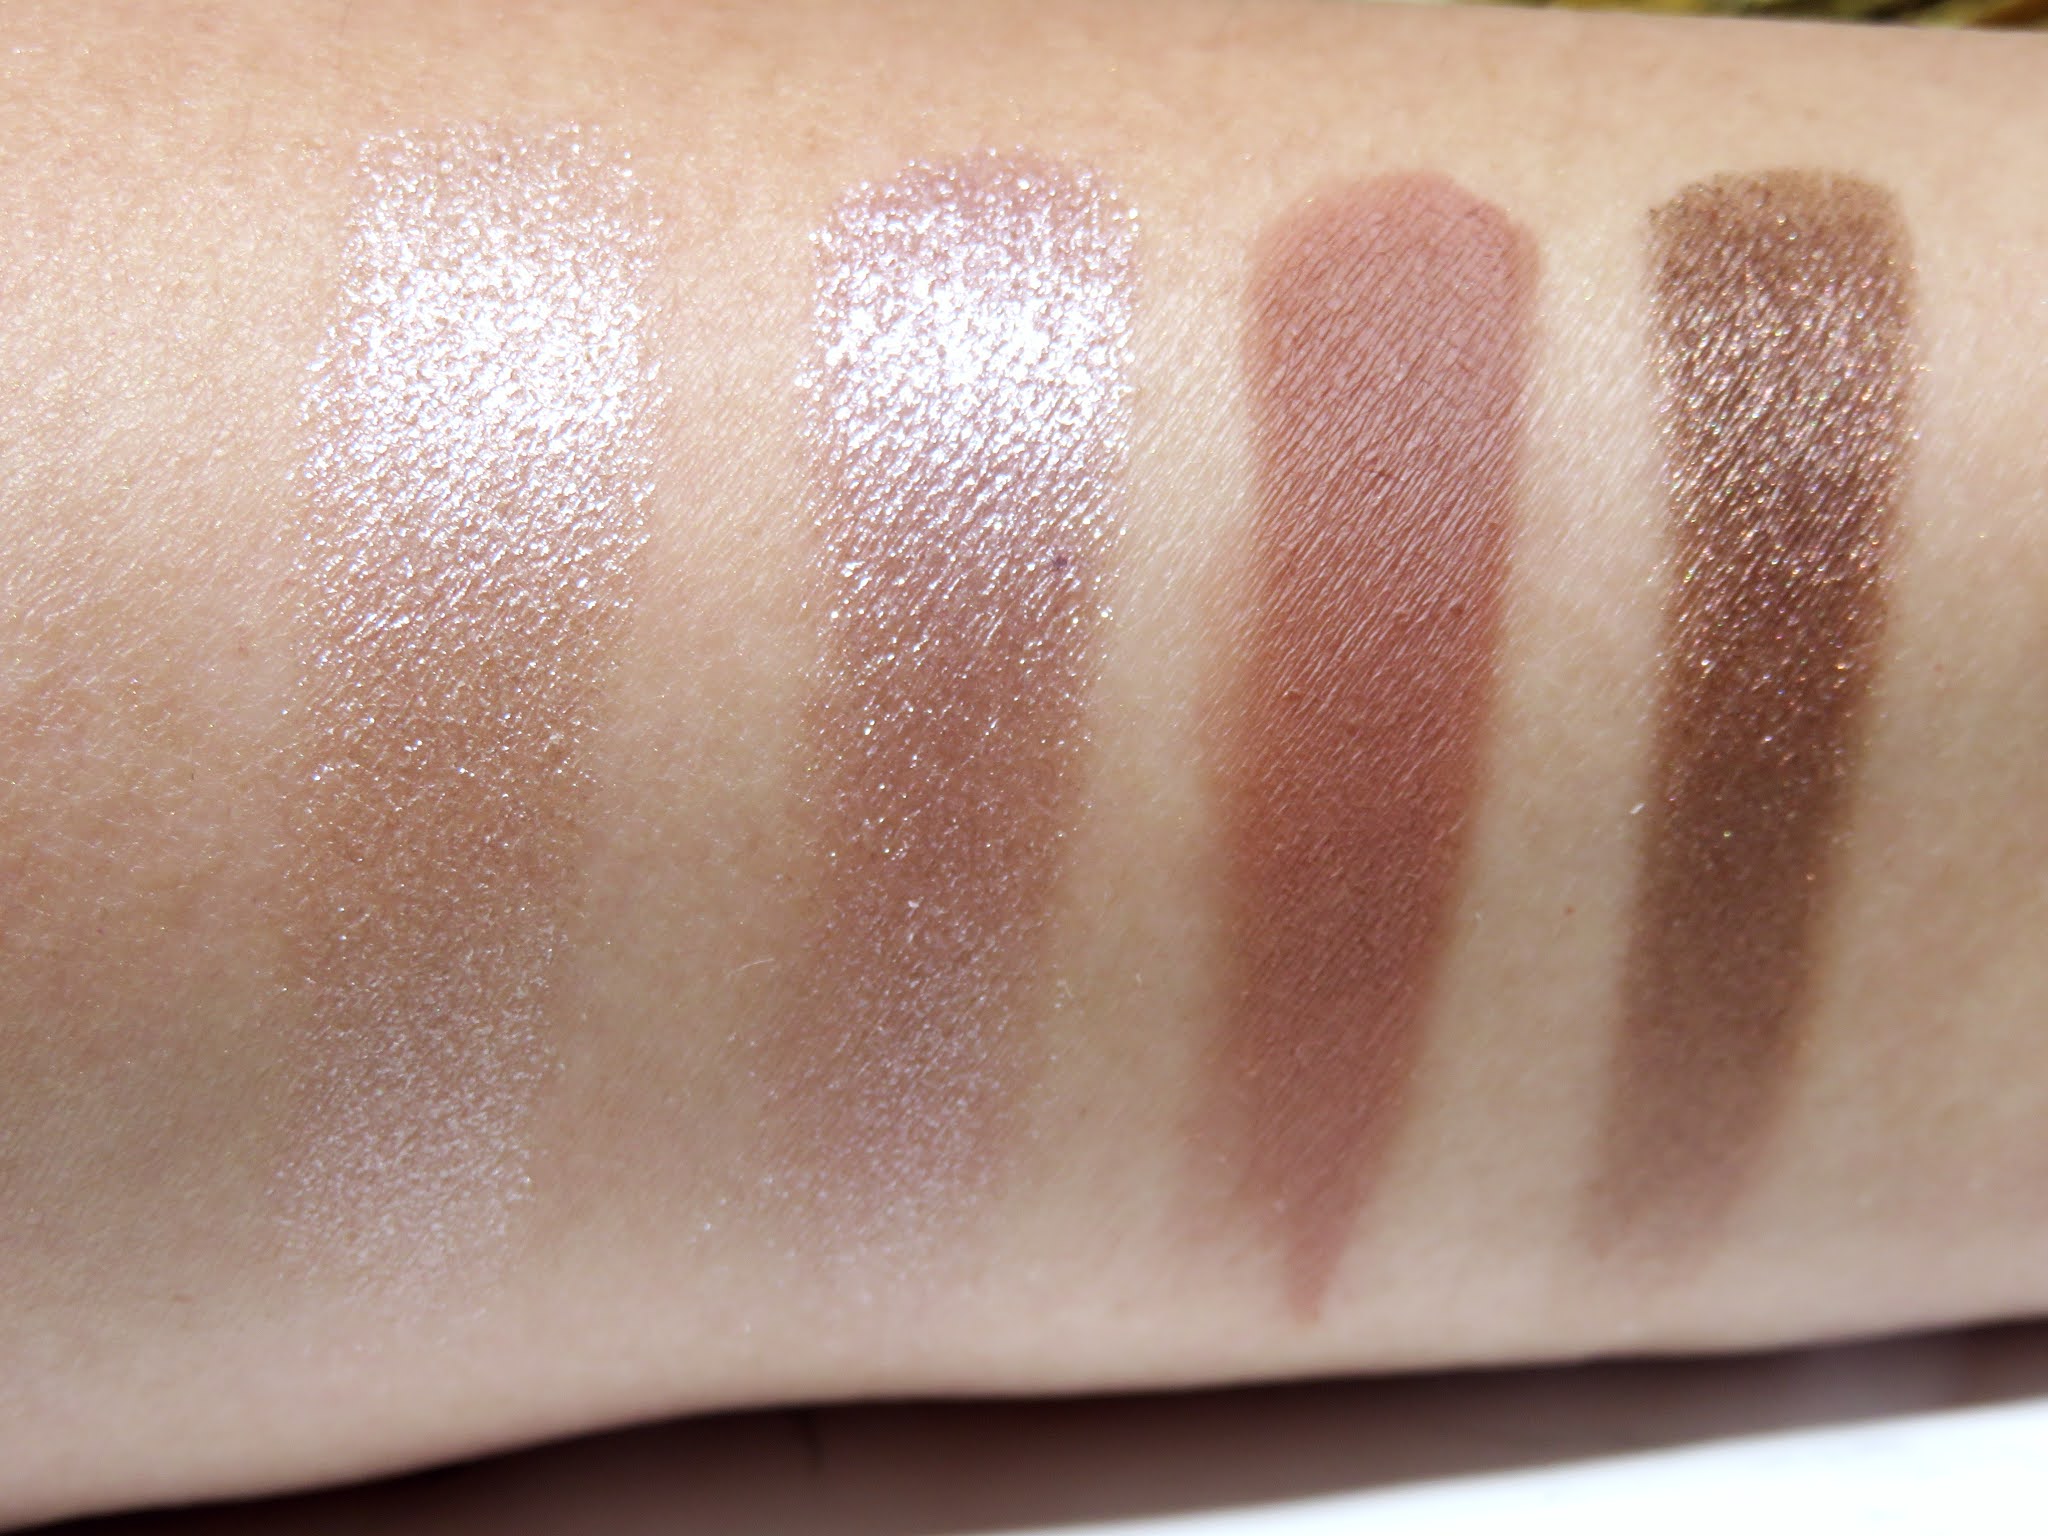 Tom Ford Meteoric Eye Color Quad Review and Swatches